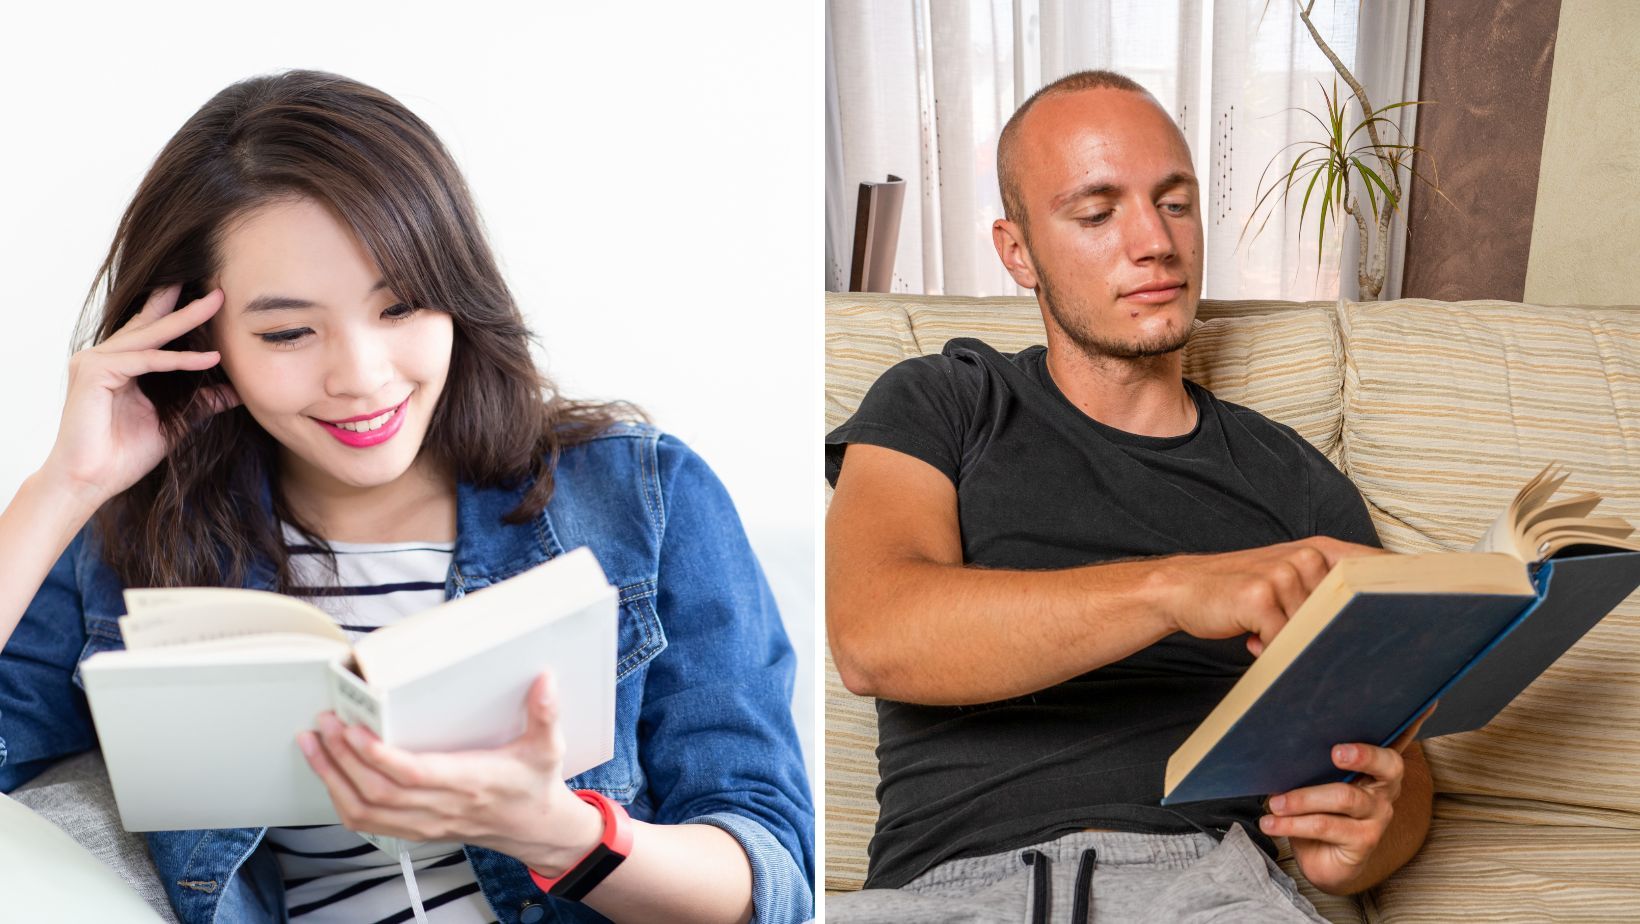 A woman and man reading books at home.